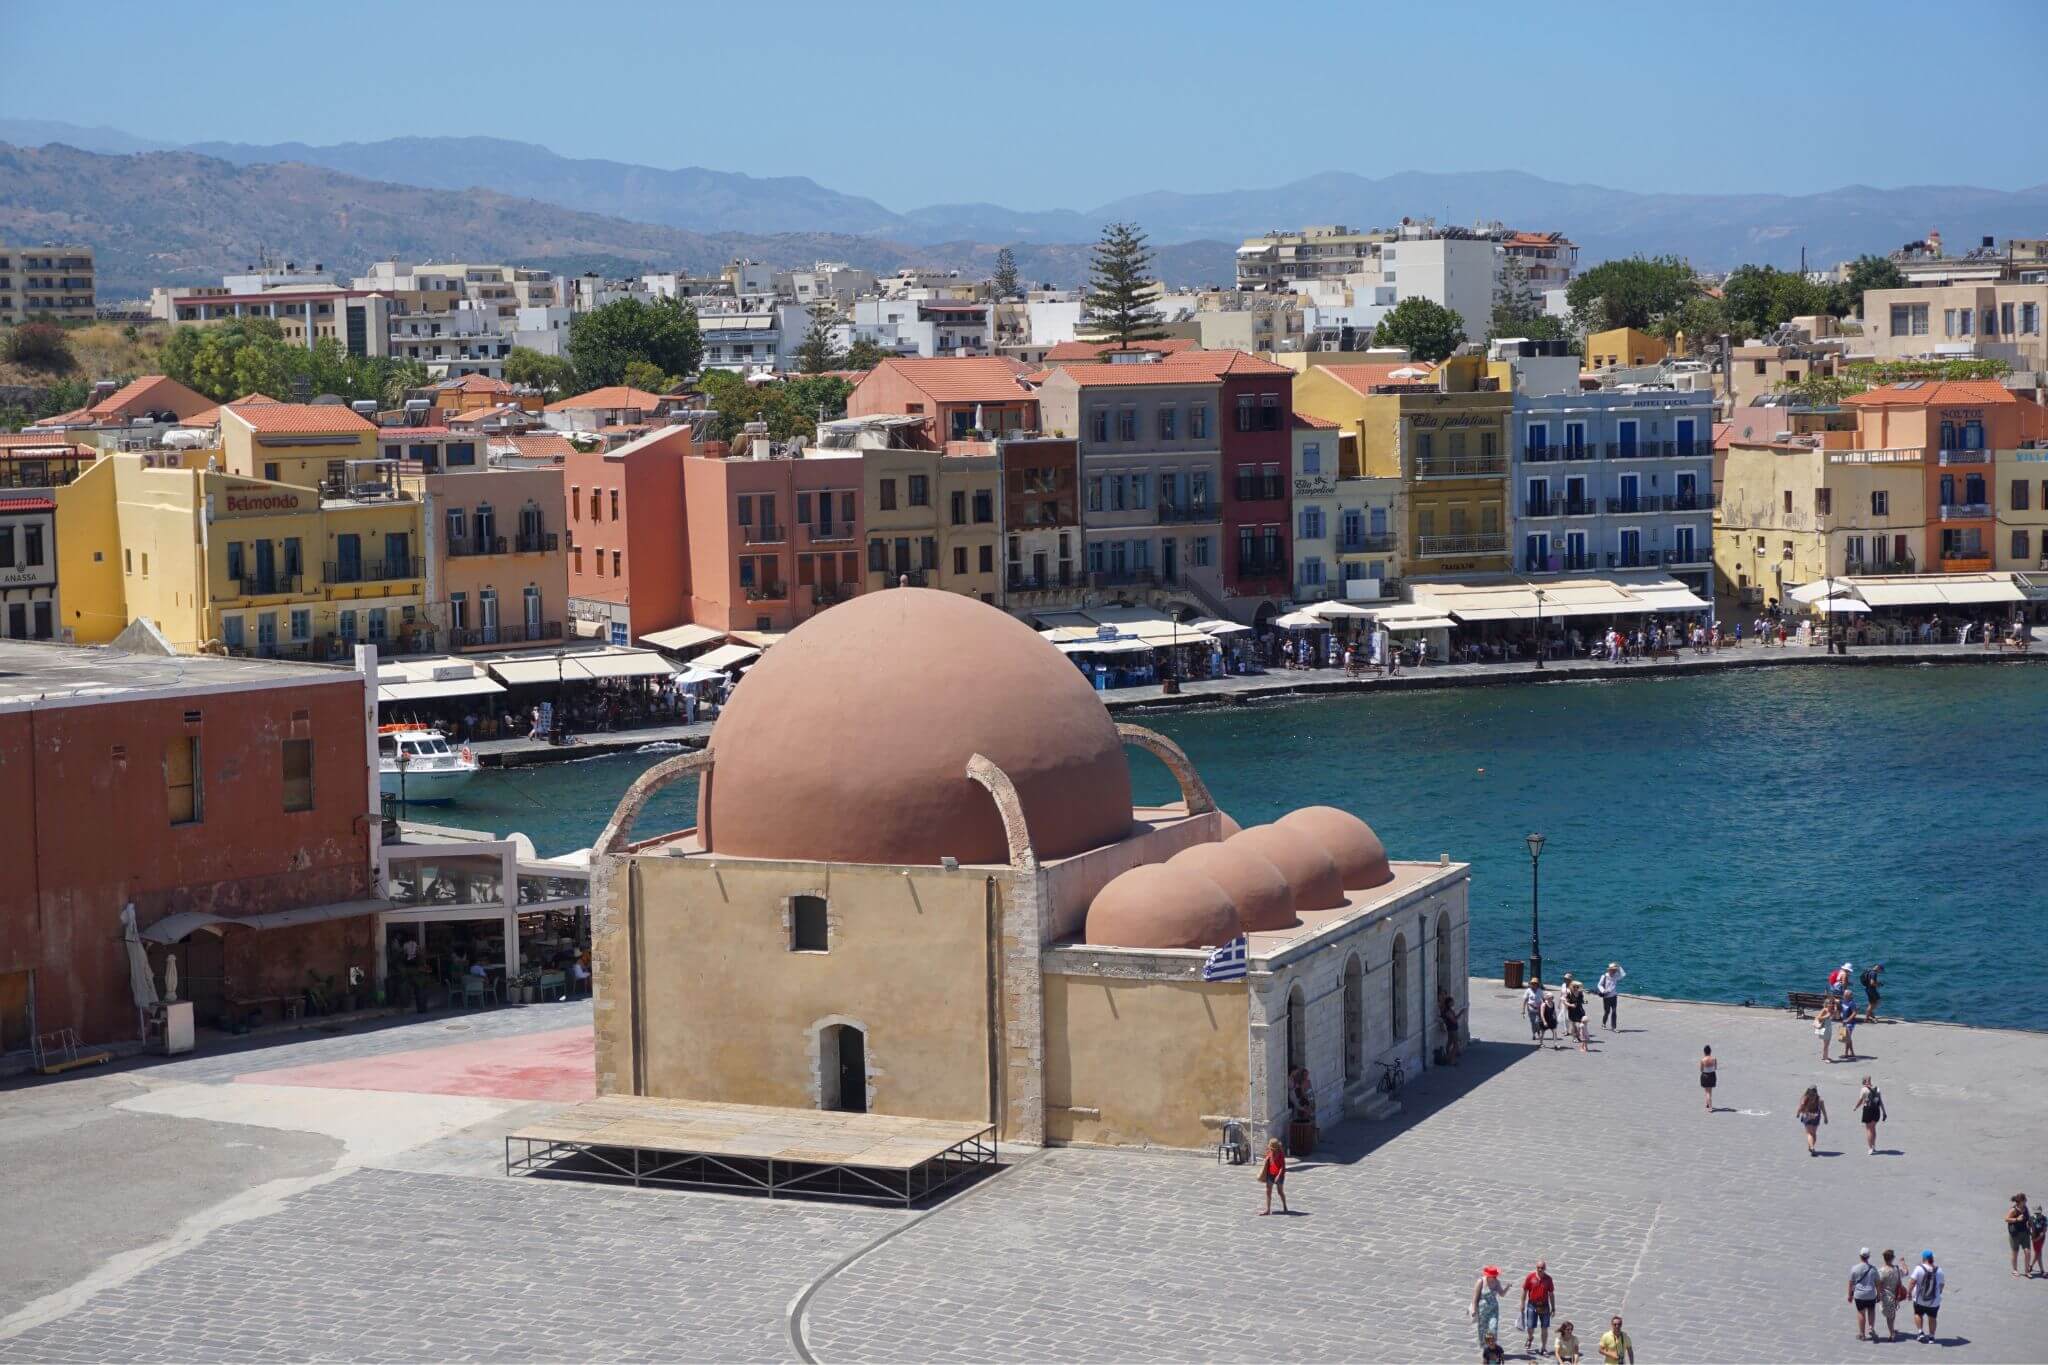 Aerial view of Chania's Old Venetian Harbour from the AG Markou viewpoint.